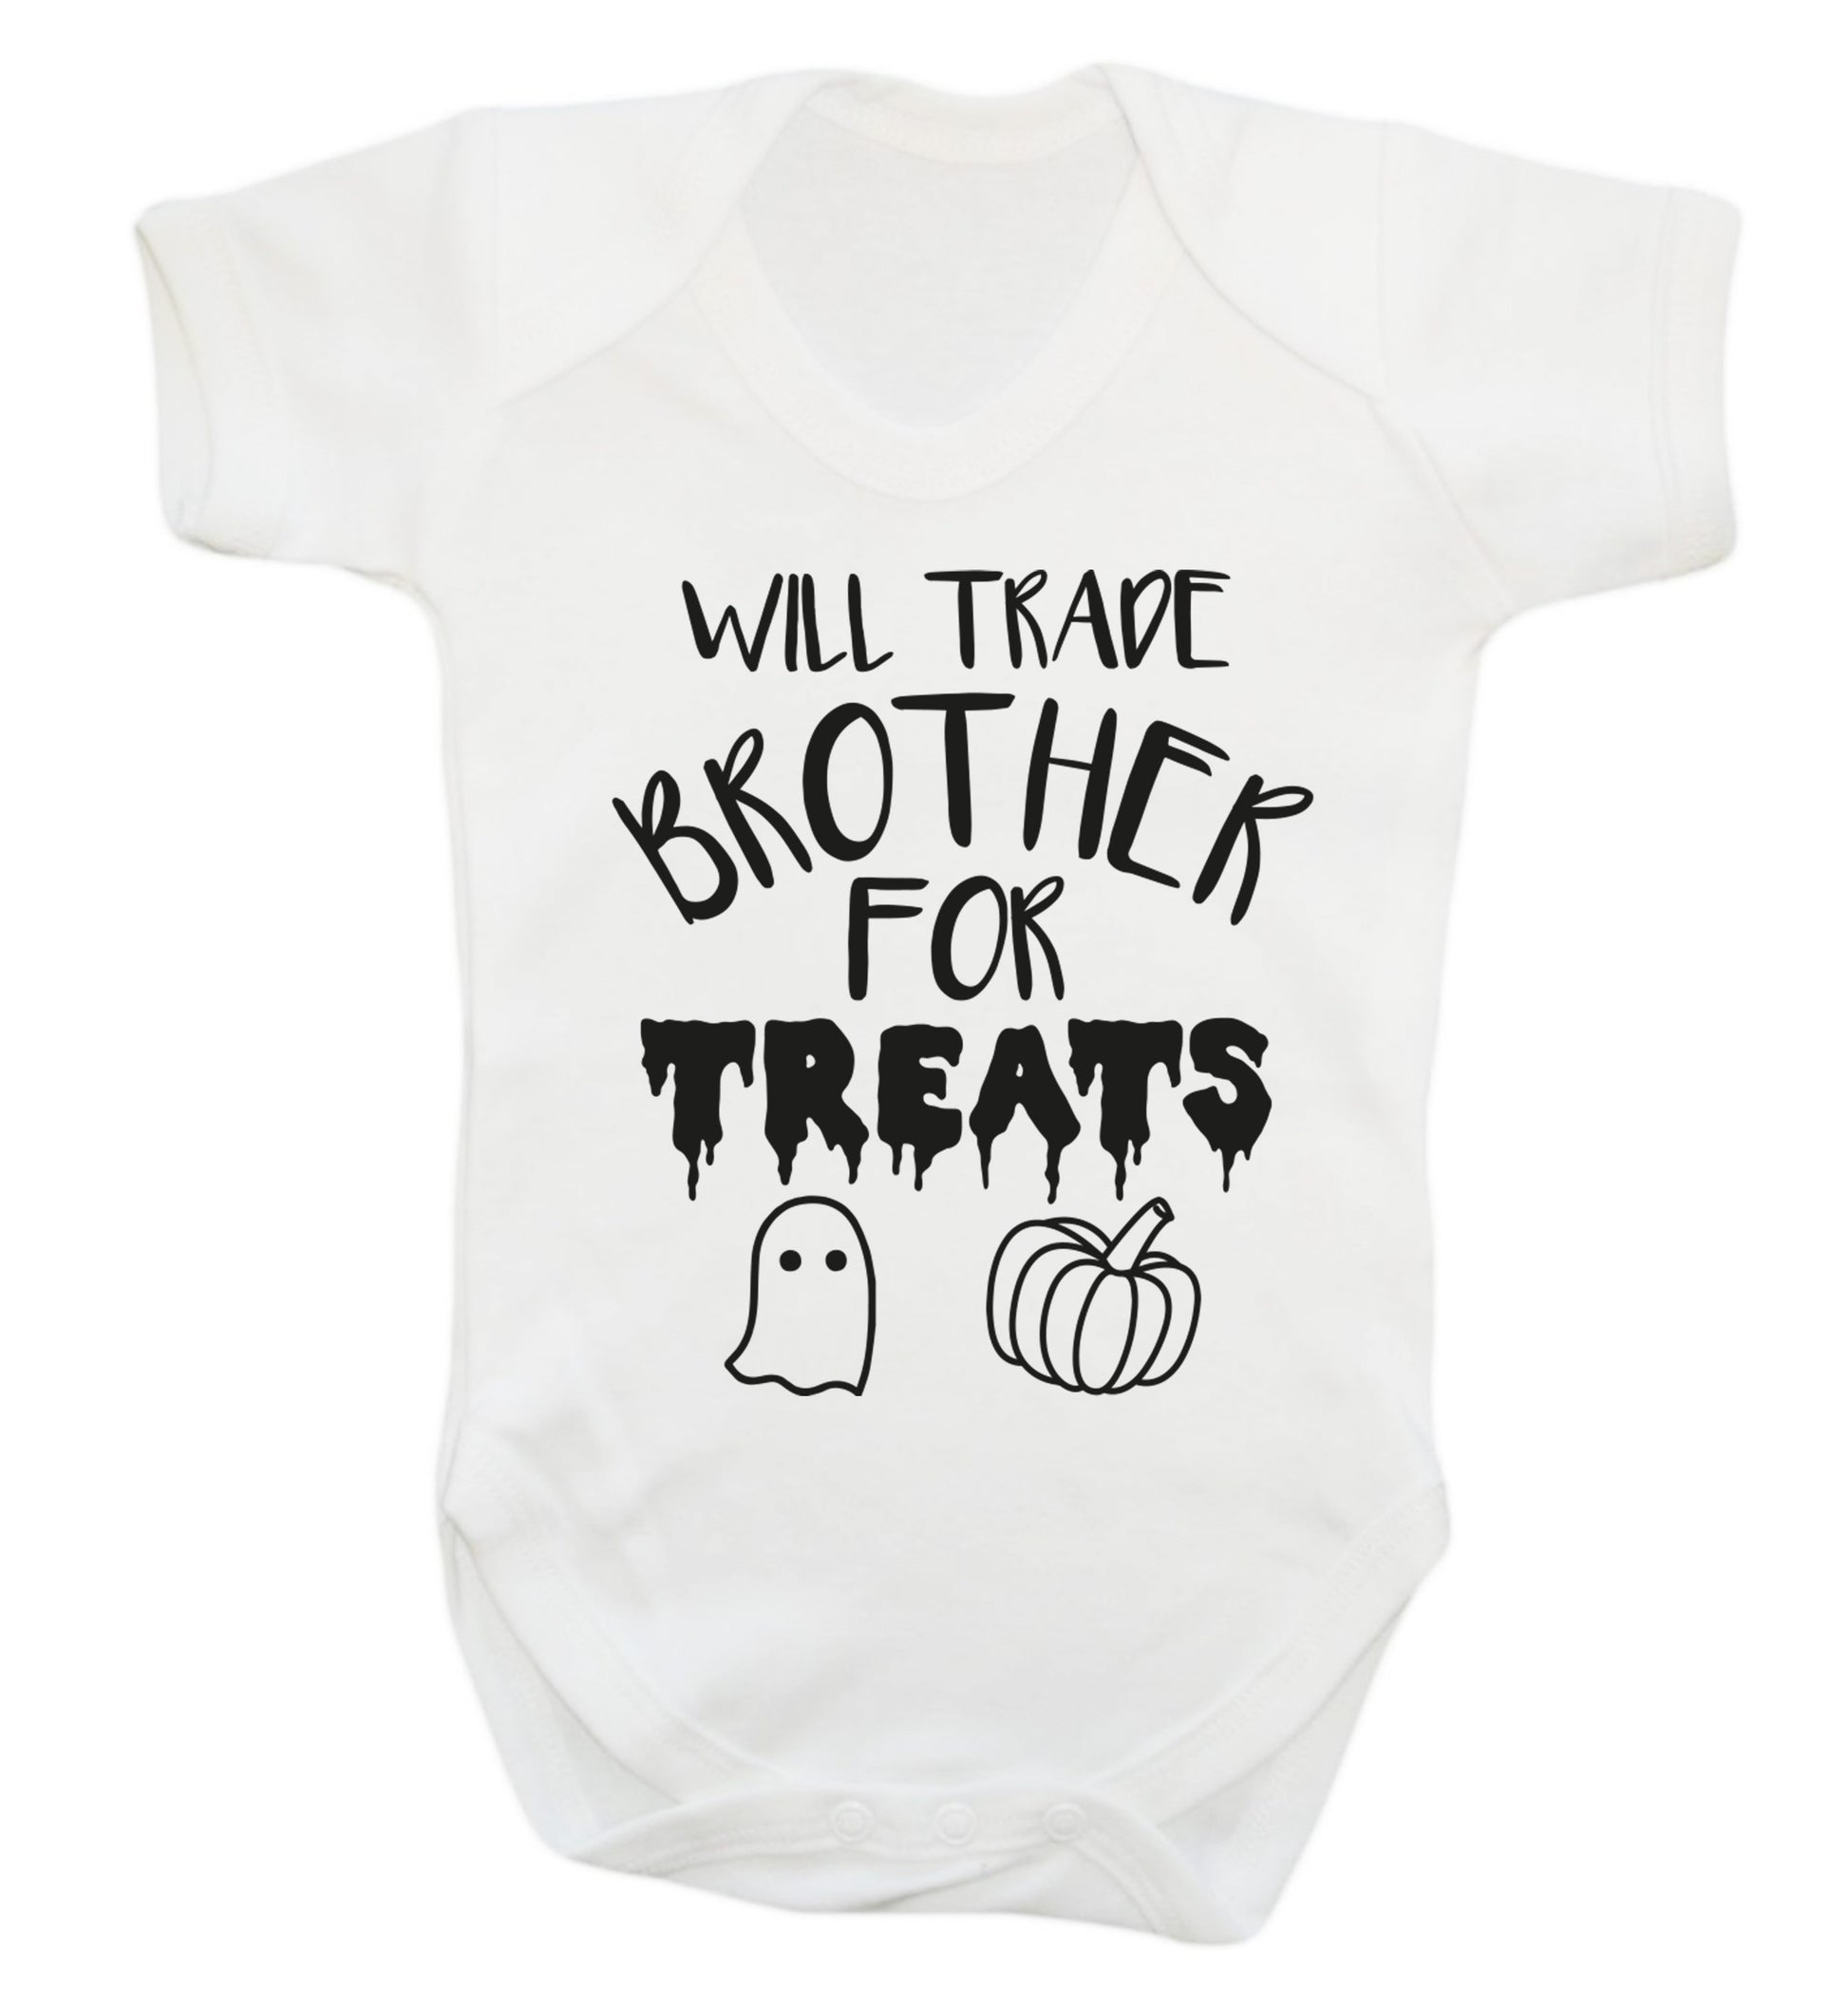 Will trade brother for treats Baby Vest white 18-24 months